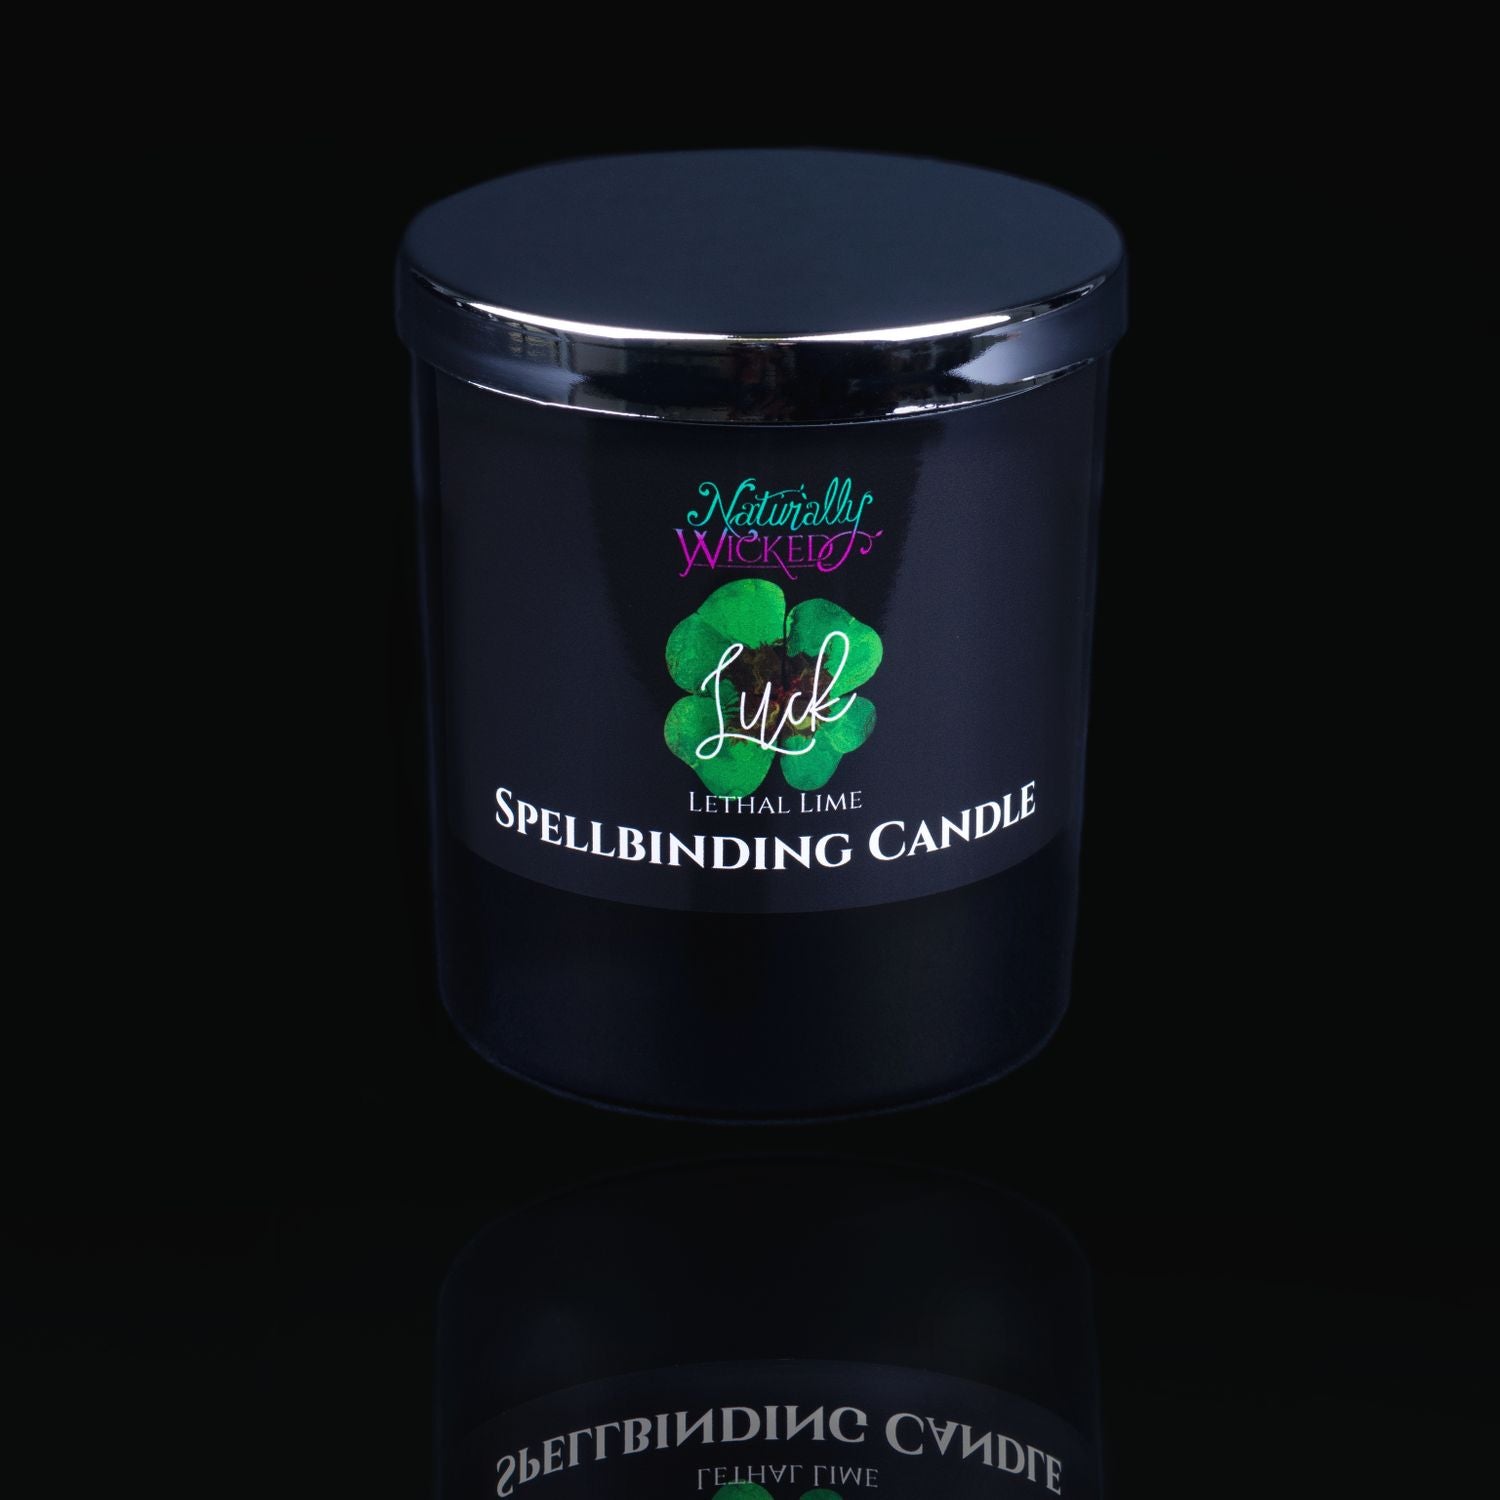 Get Lucky With The Naturally Wicked Spellbinding Luck Spell Candle With Mirror Finished Exquisite Lid In Place. Featuring A Black Gloss Label And An Enchanting Lucky 4 Leaf Clover. 